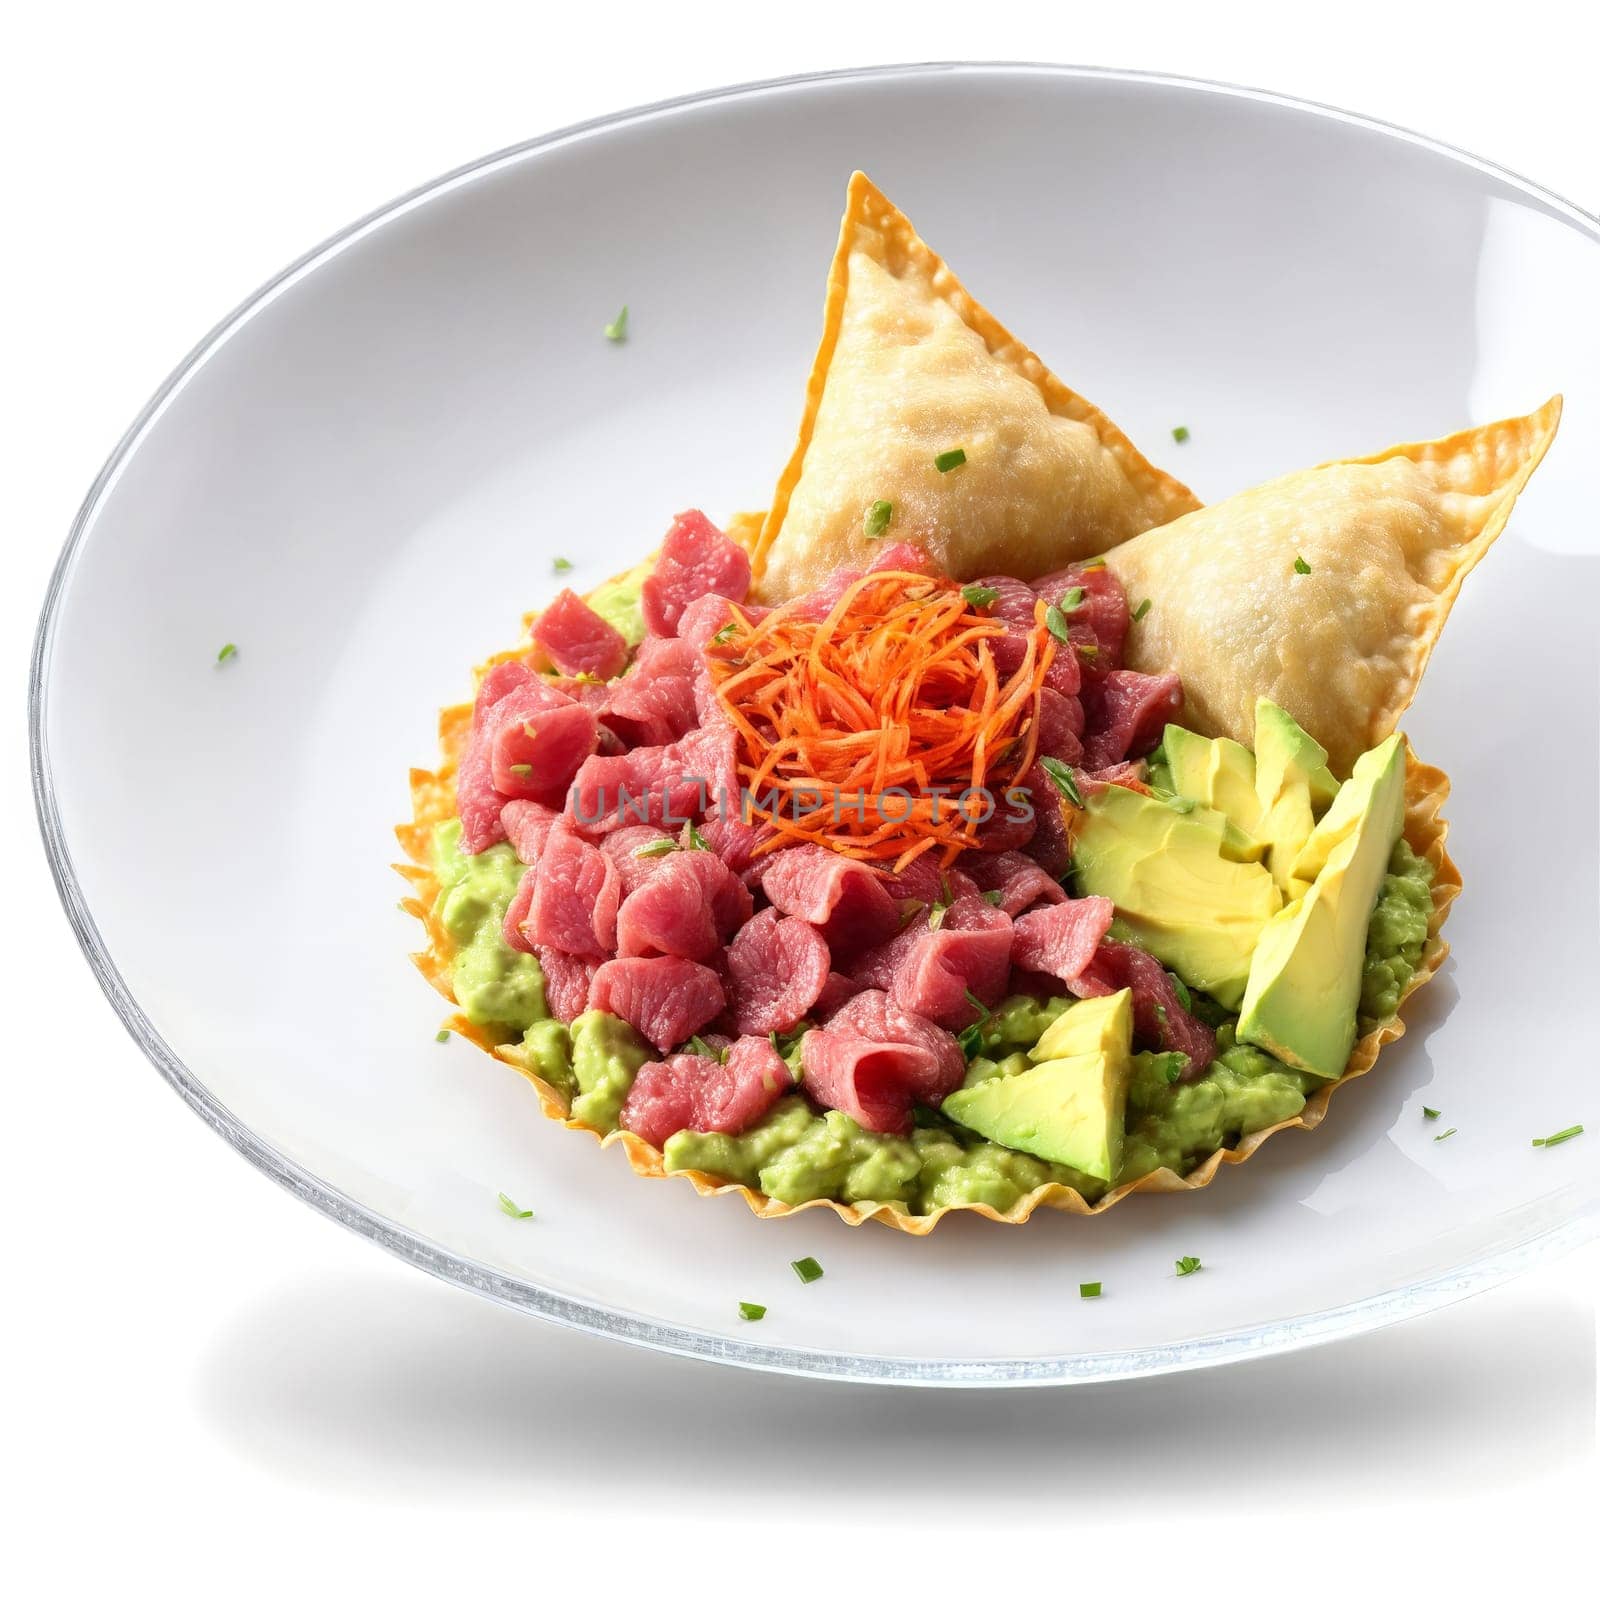 Beef tartare taco chopped raw beef mound avocado rose crispy wonton shell in glass dish. Food isolated on transparent background.